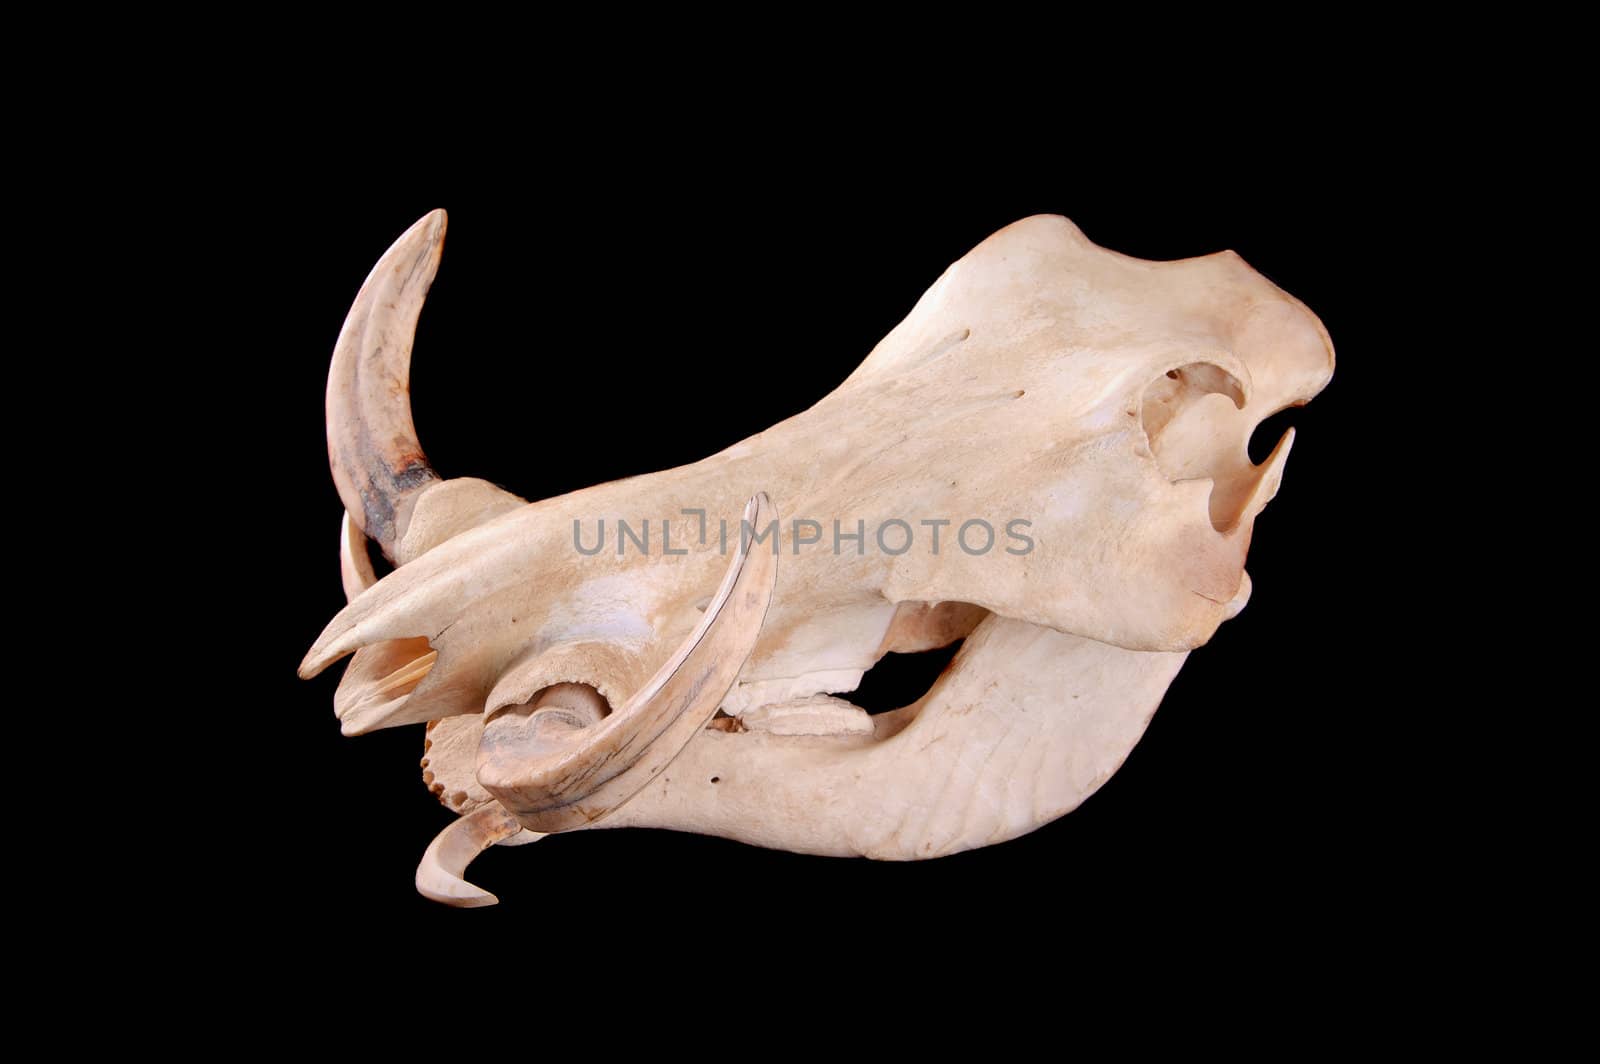 skull of an African Wart hog on a black background